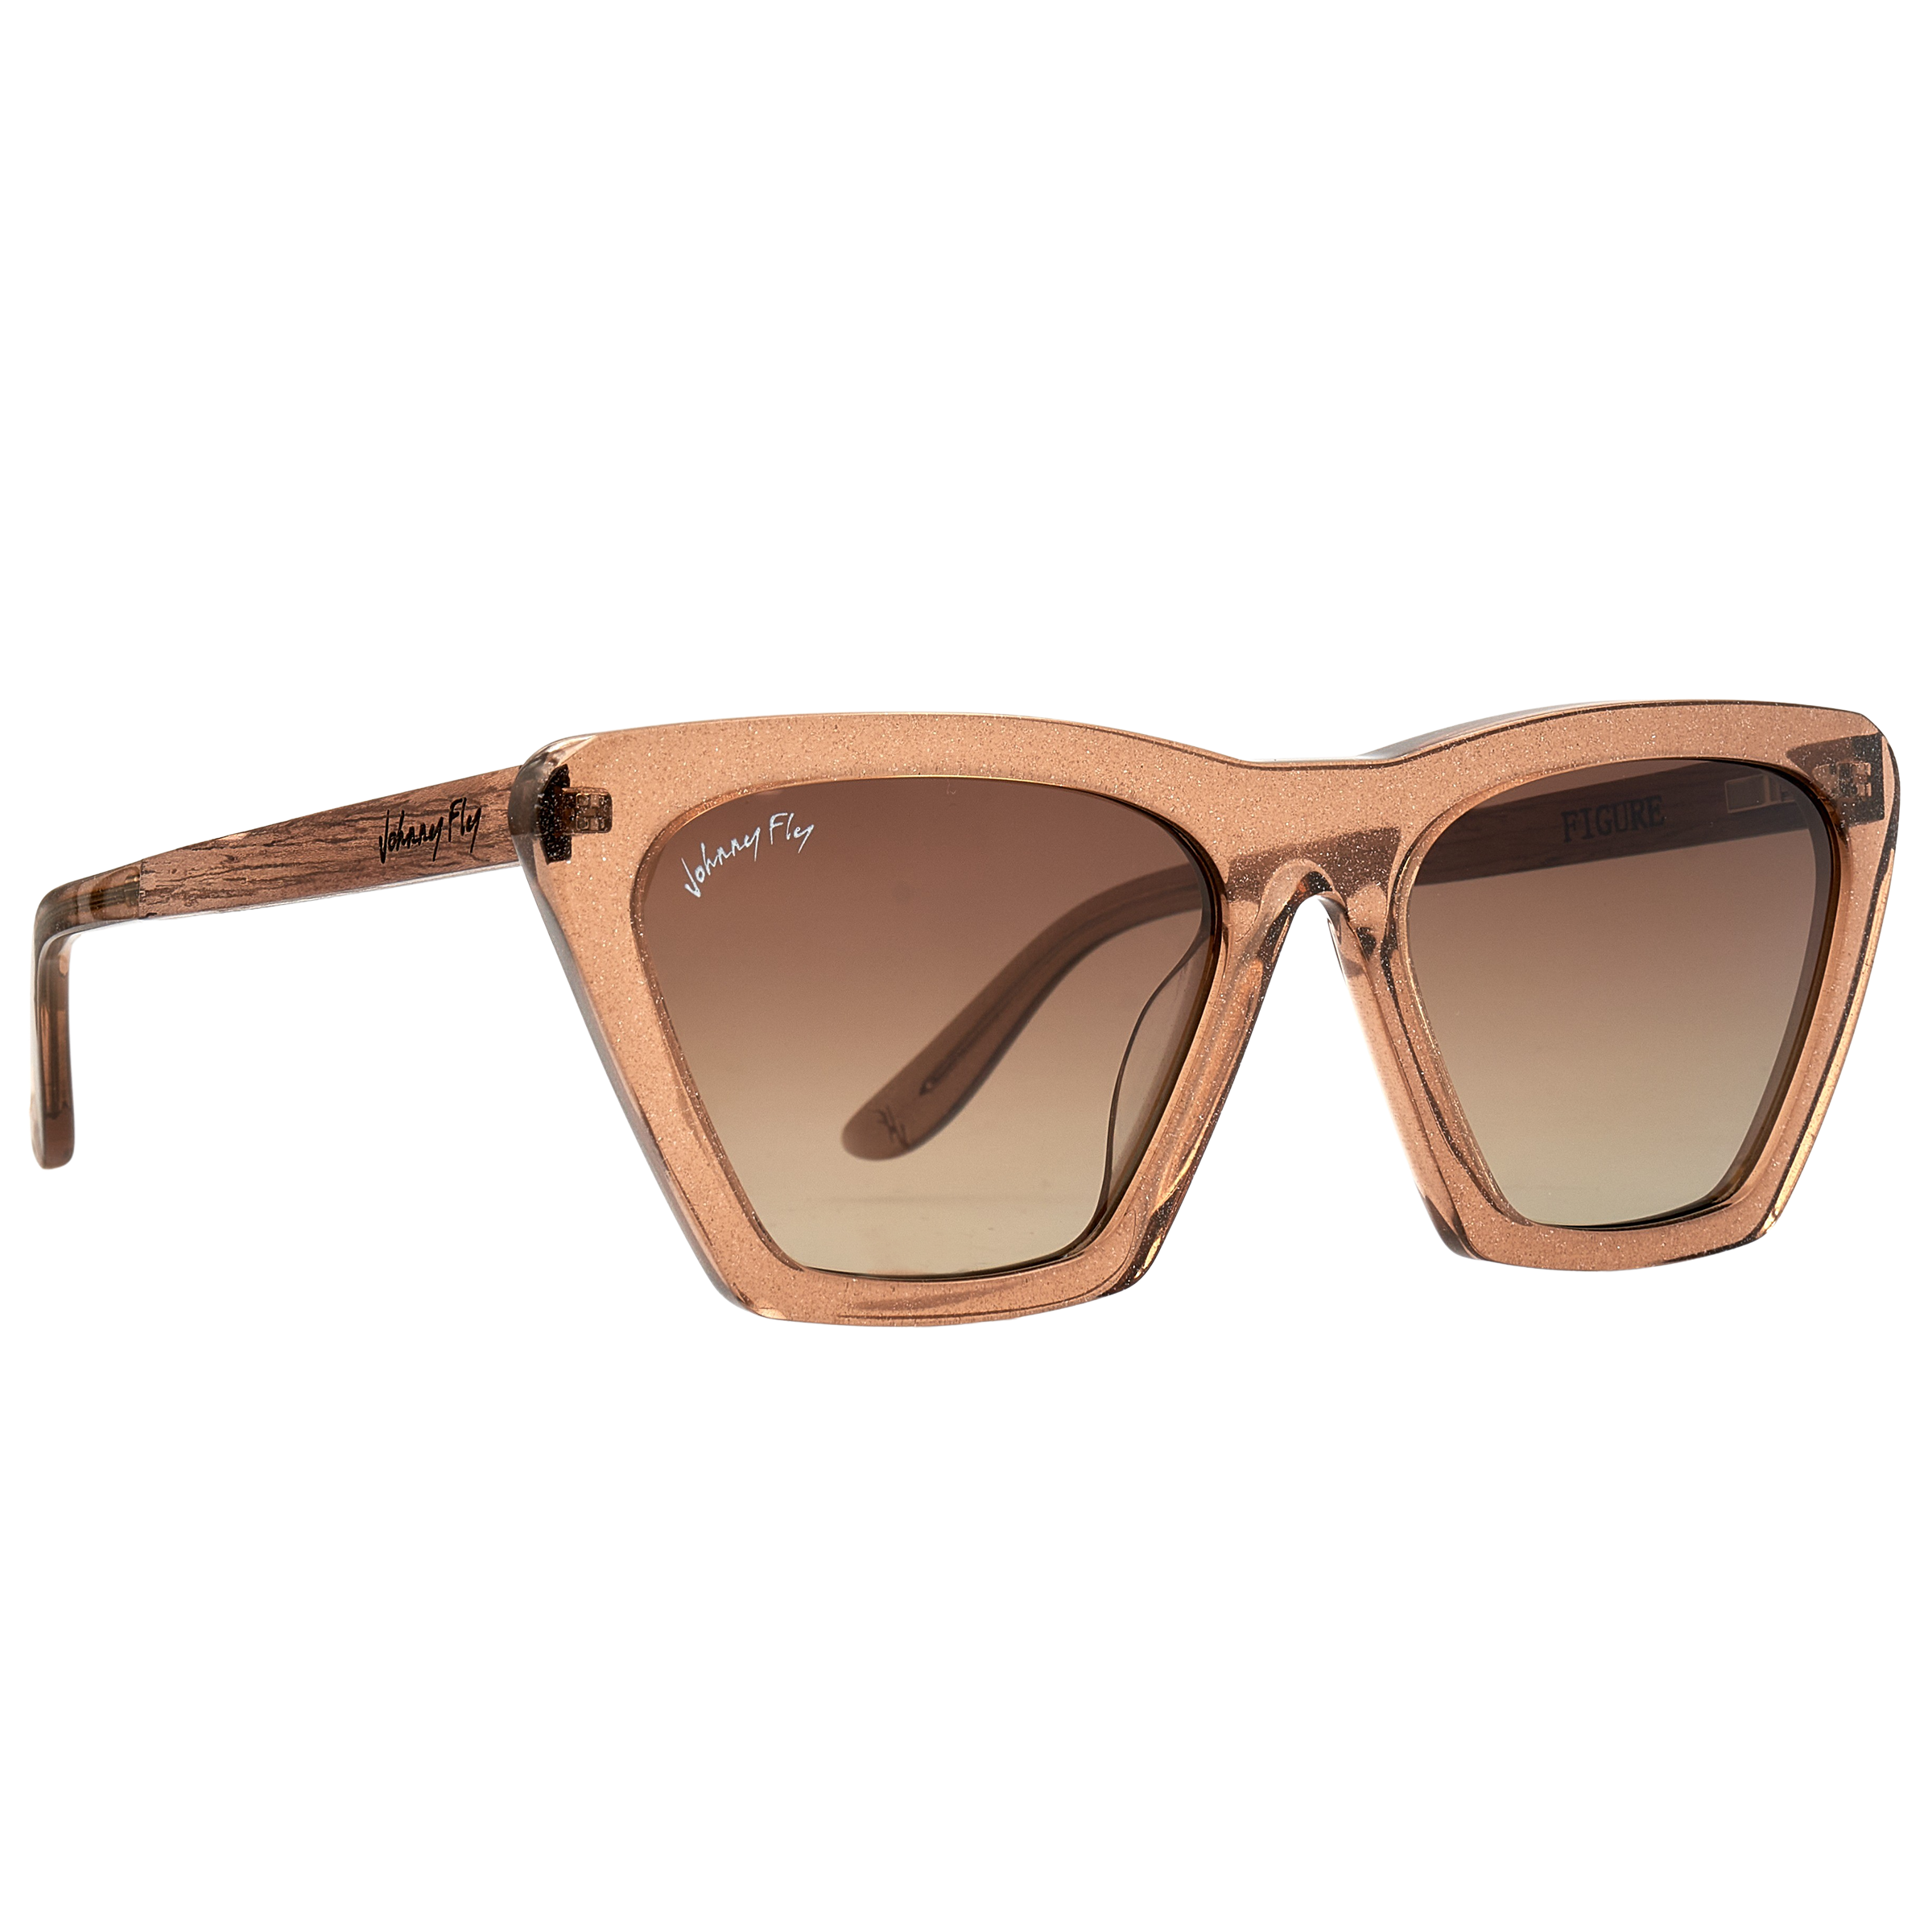 Figure Sunglasses by Johnny Fly